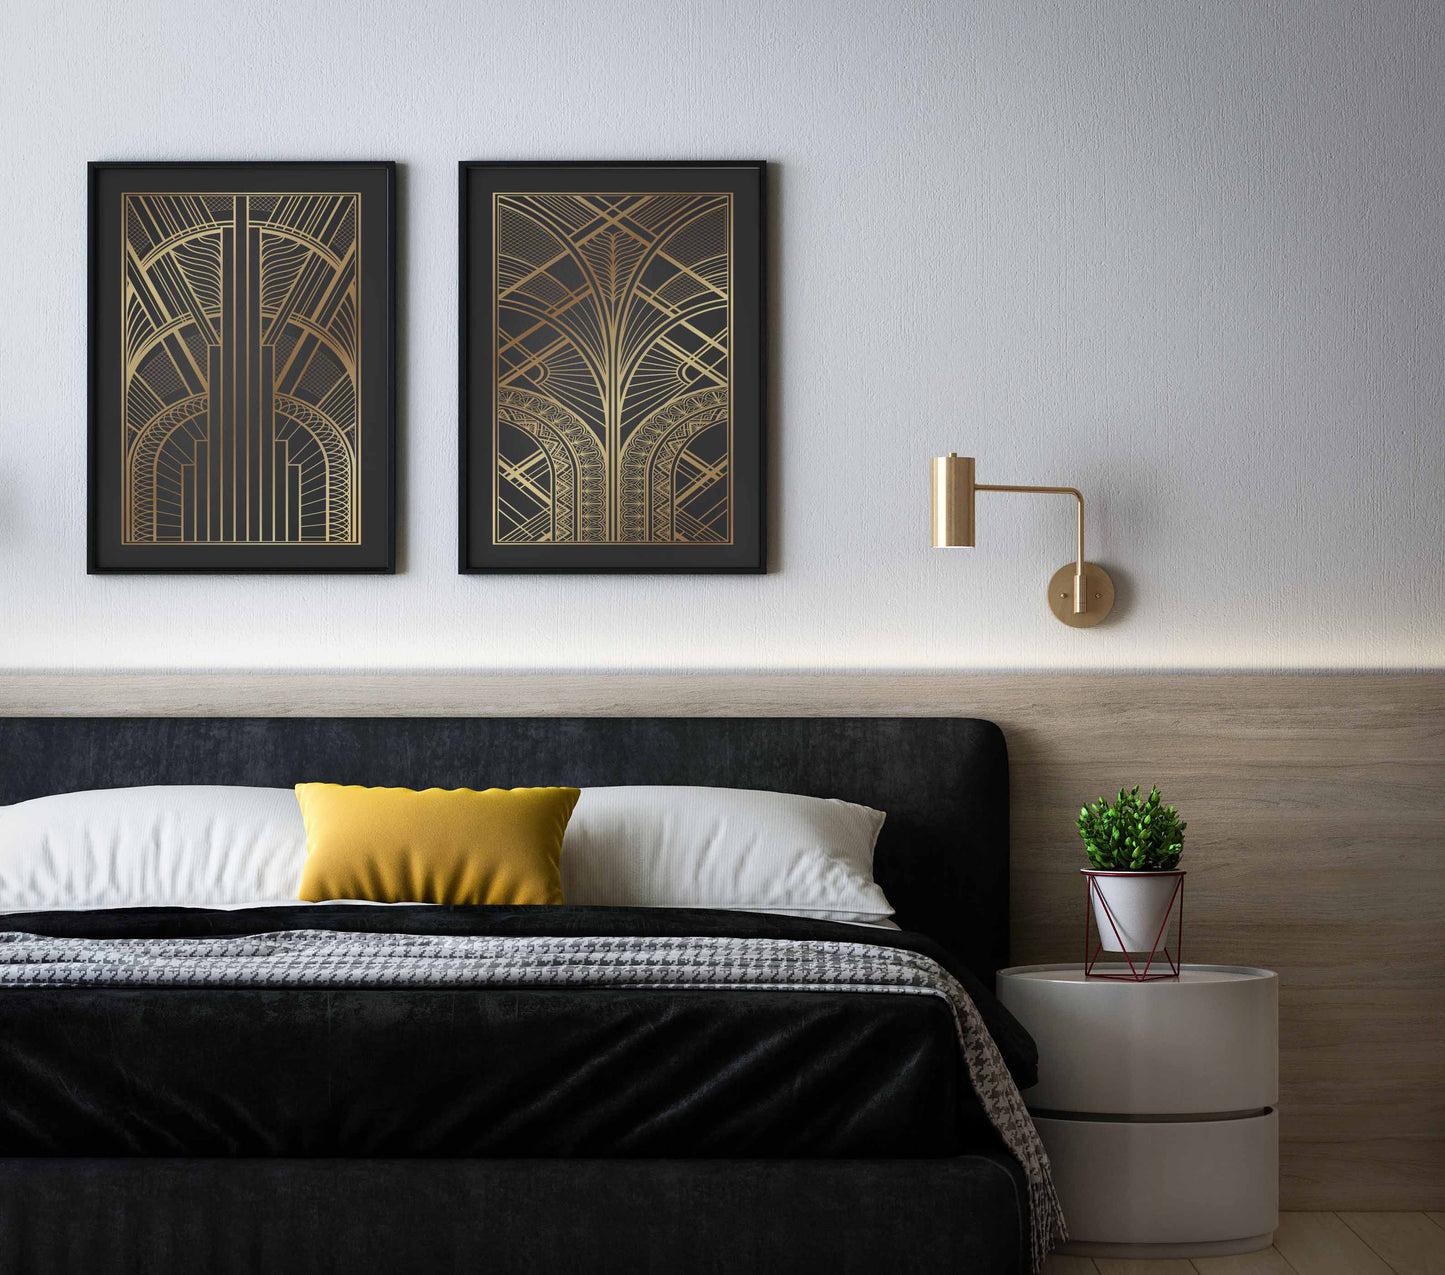 Art deco set of prints in black and gold